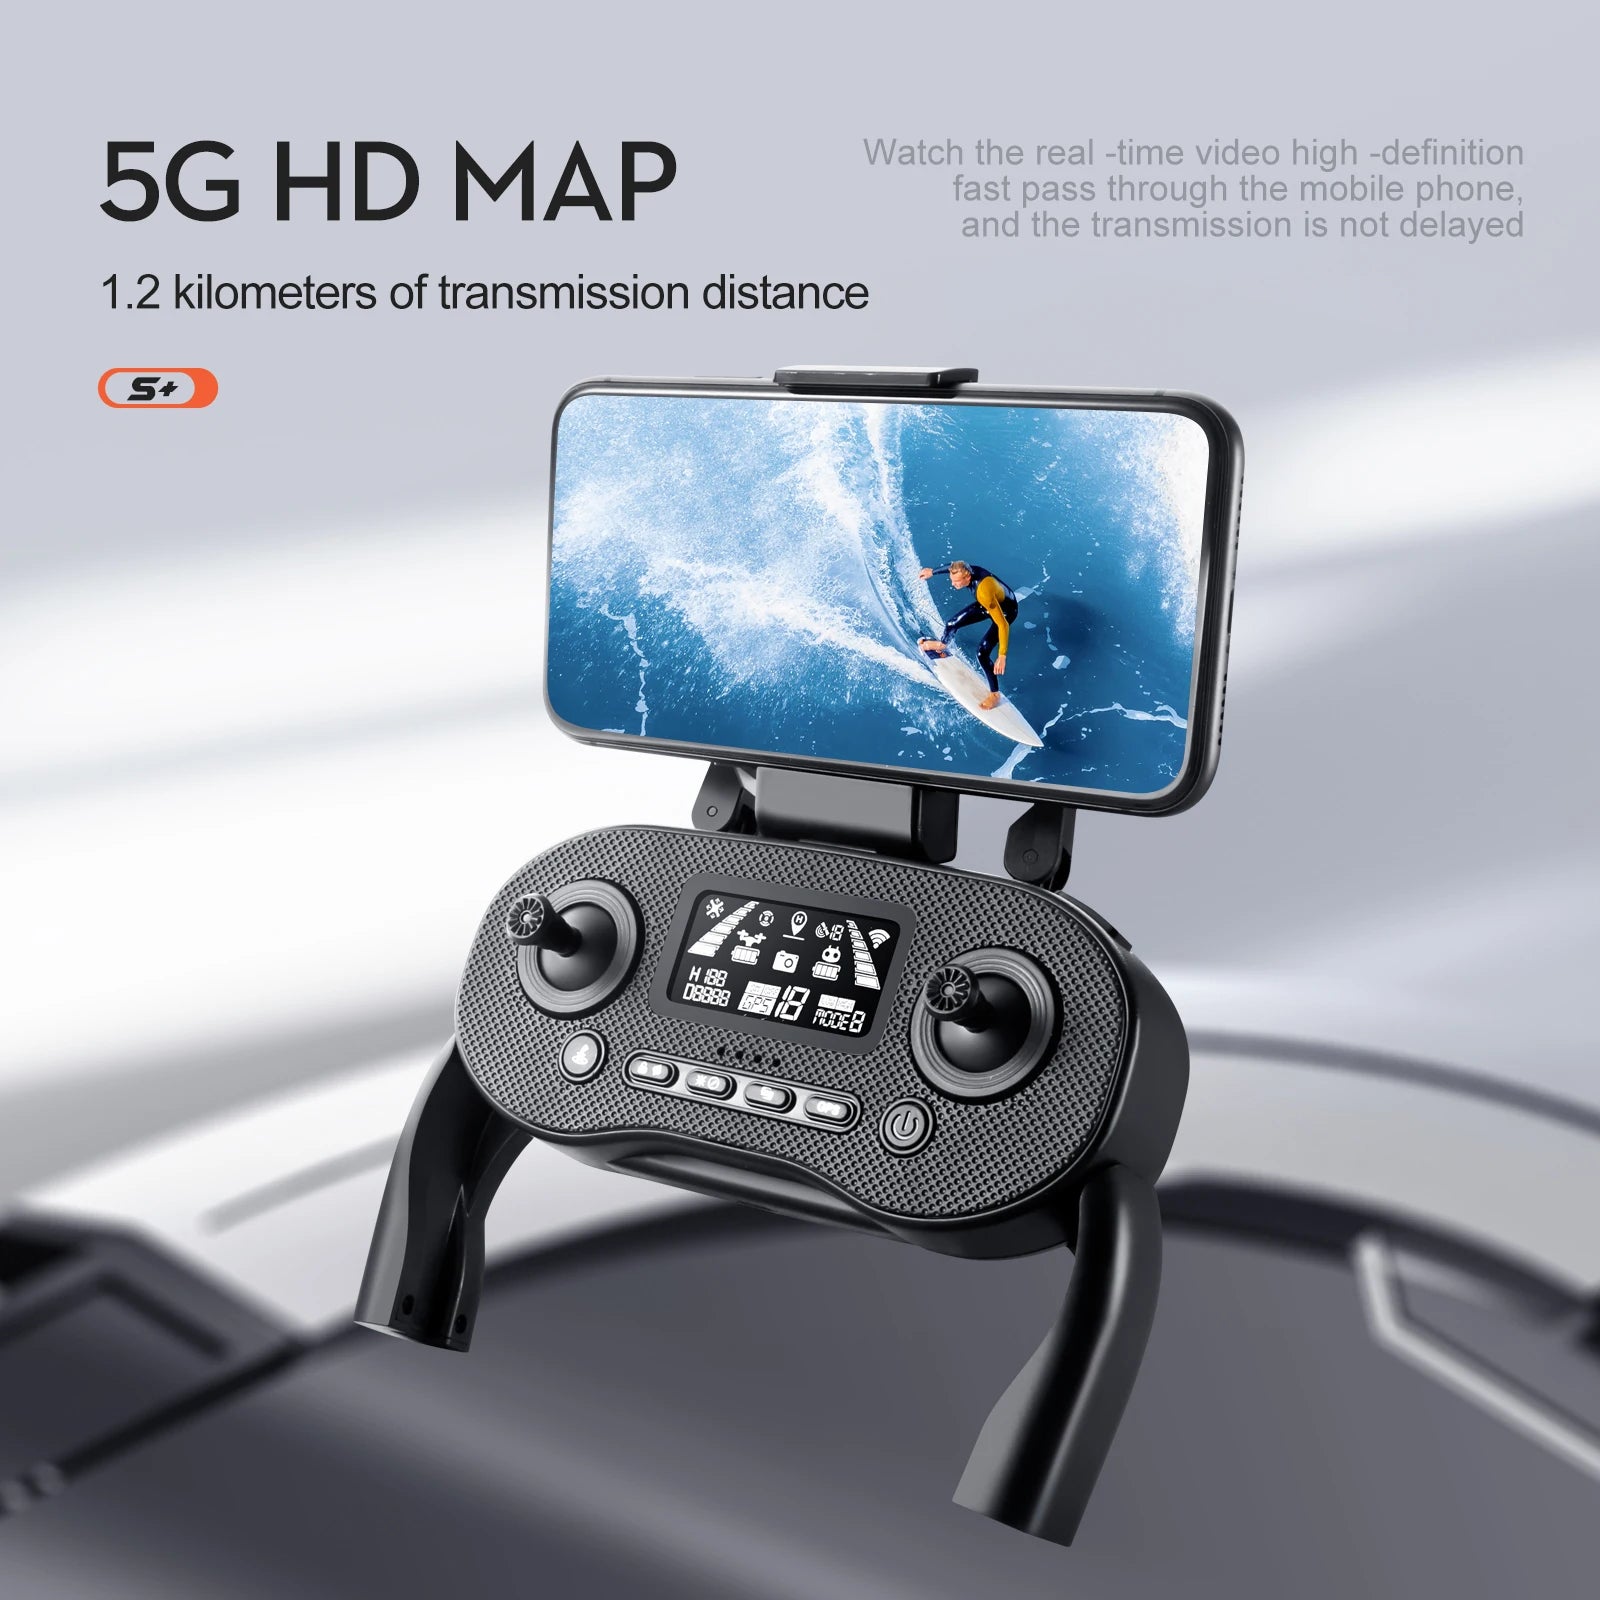 S+ Drone, watch the real -time video high -definition 56 HD MAP fast pass